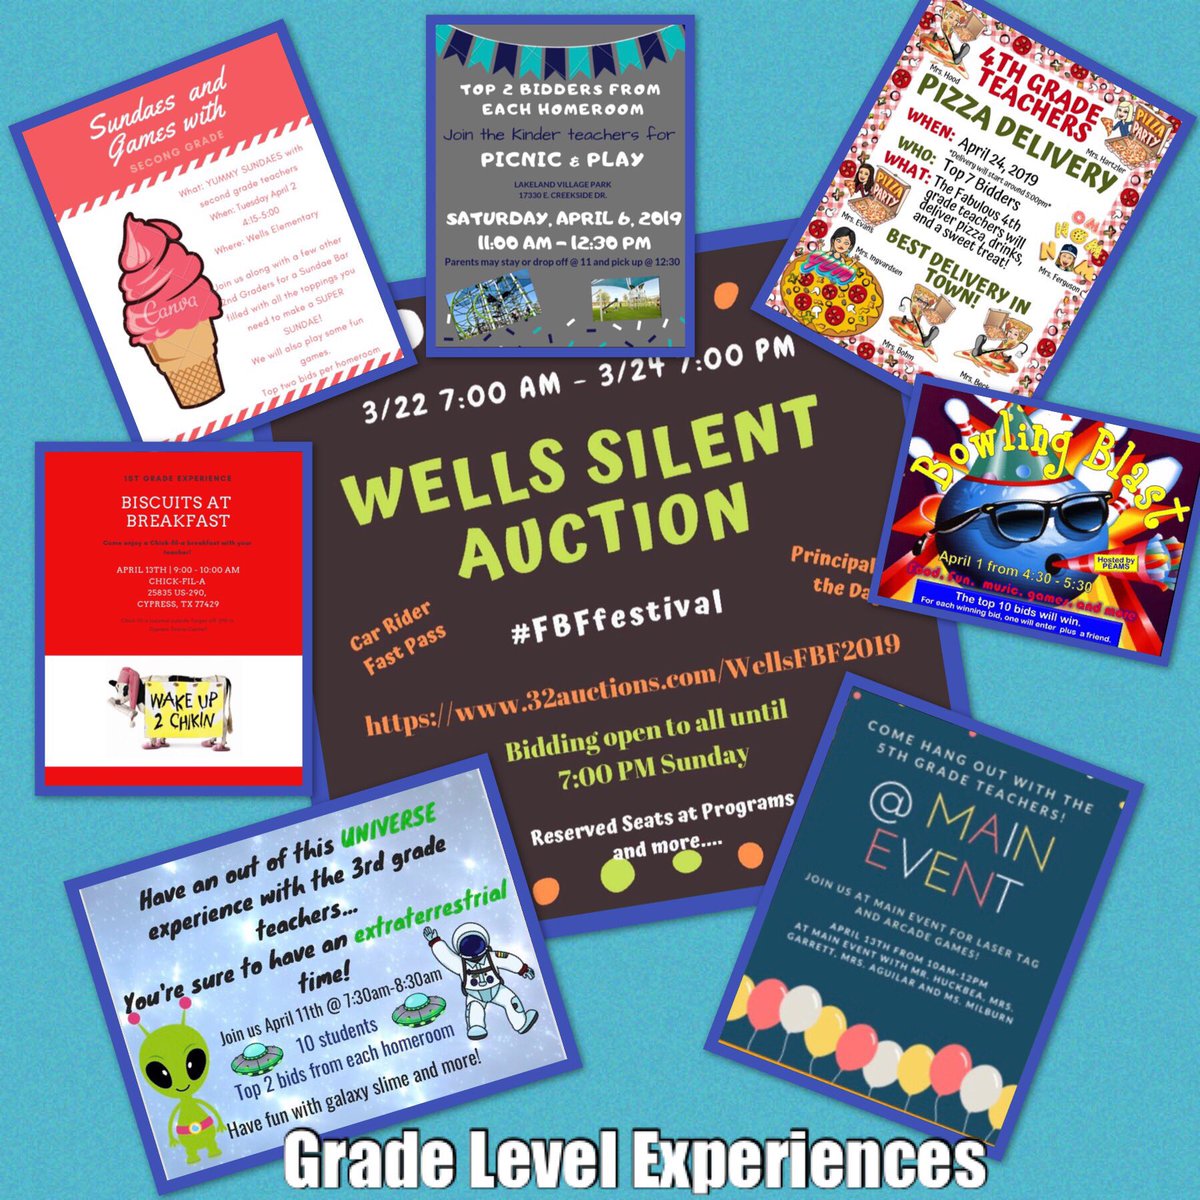 Our @CFISDWells silent auction is going on now. Log on to 32auctions.com/WellsFBF2019 and place a bid for a chance to win these priceless experiences. There are lots of other awesome items to bid on too. #ExploreWells #gradelevelexperiences #FBFfestival